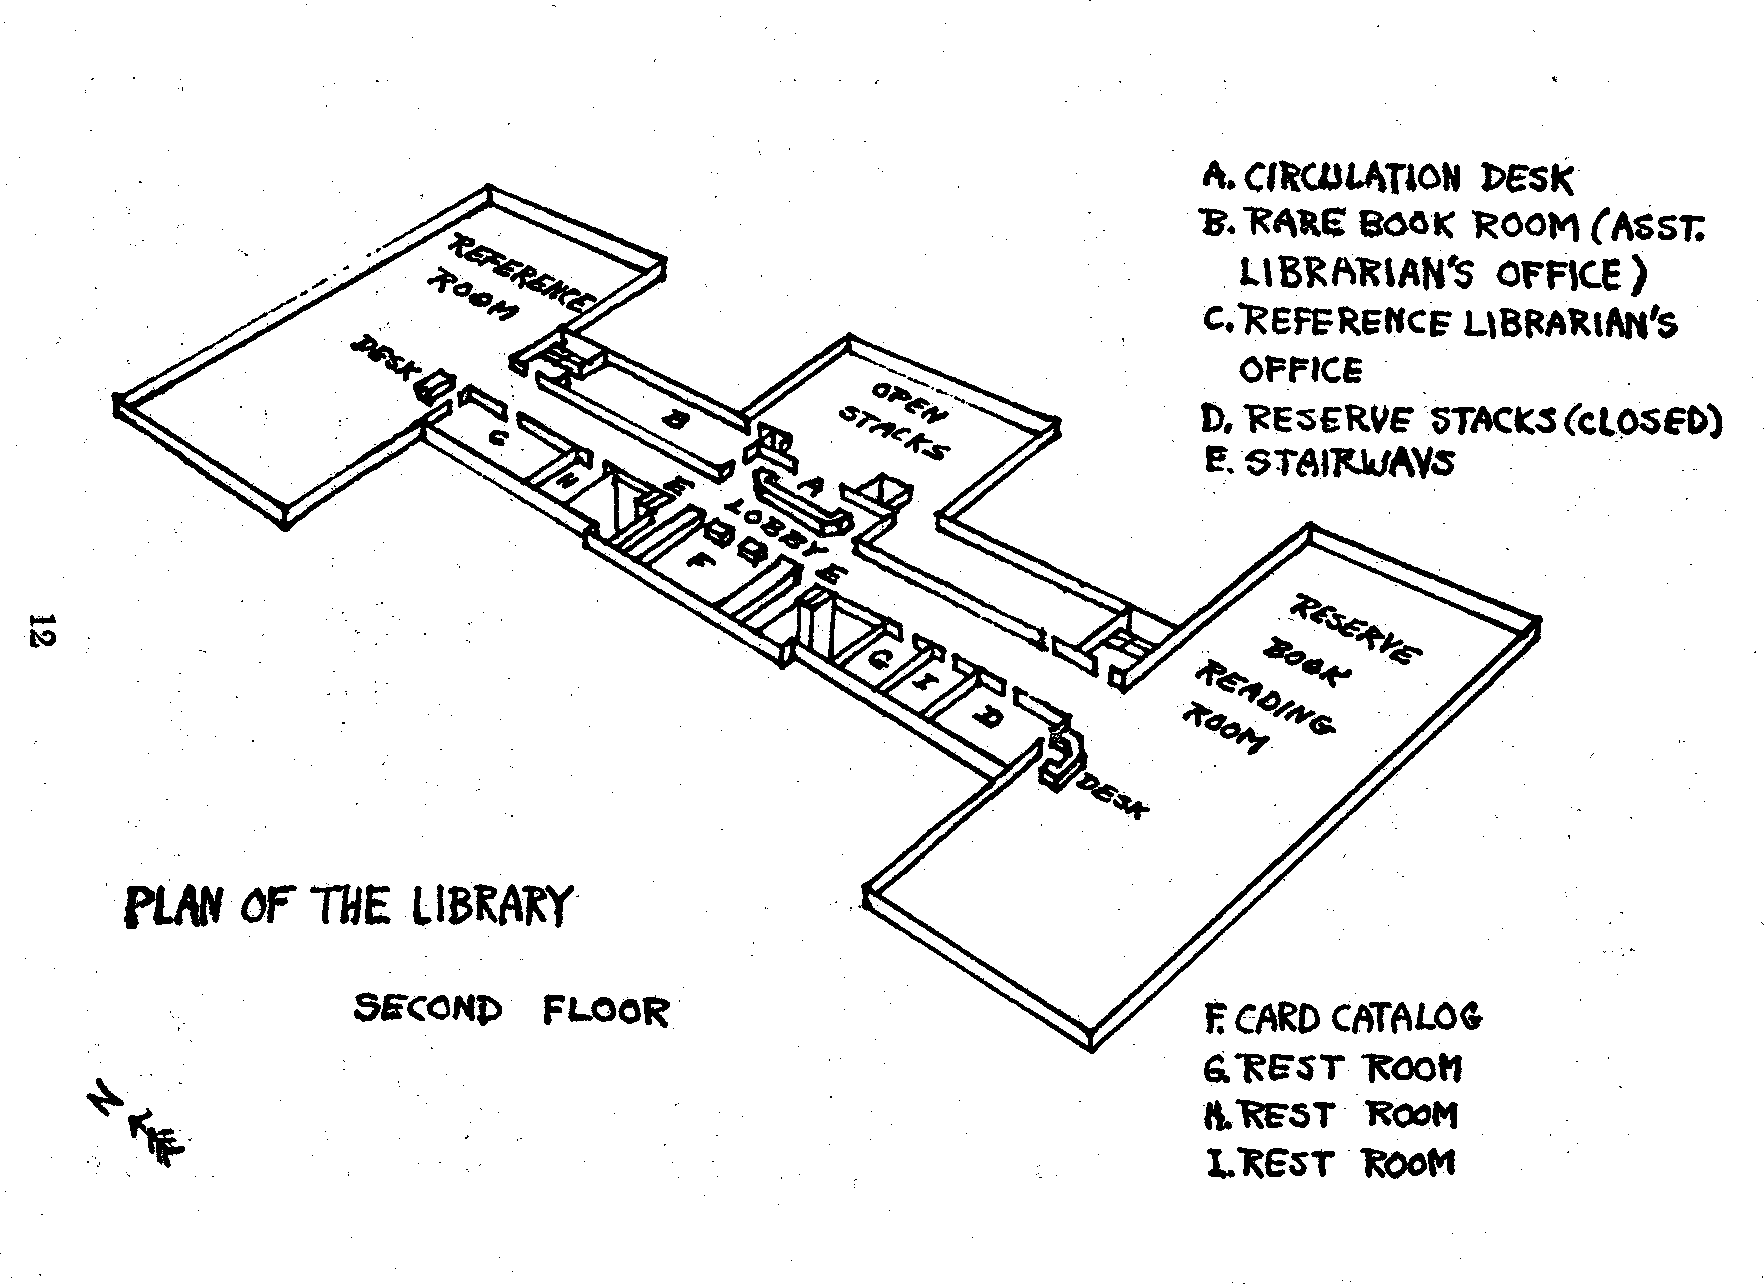 The plan of the building.